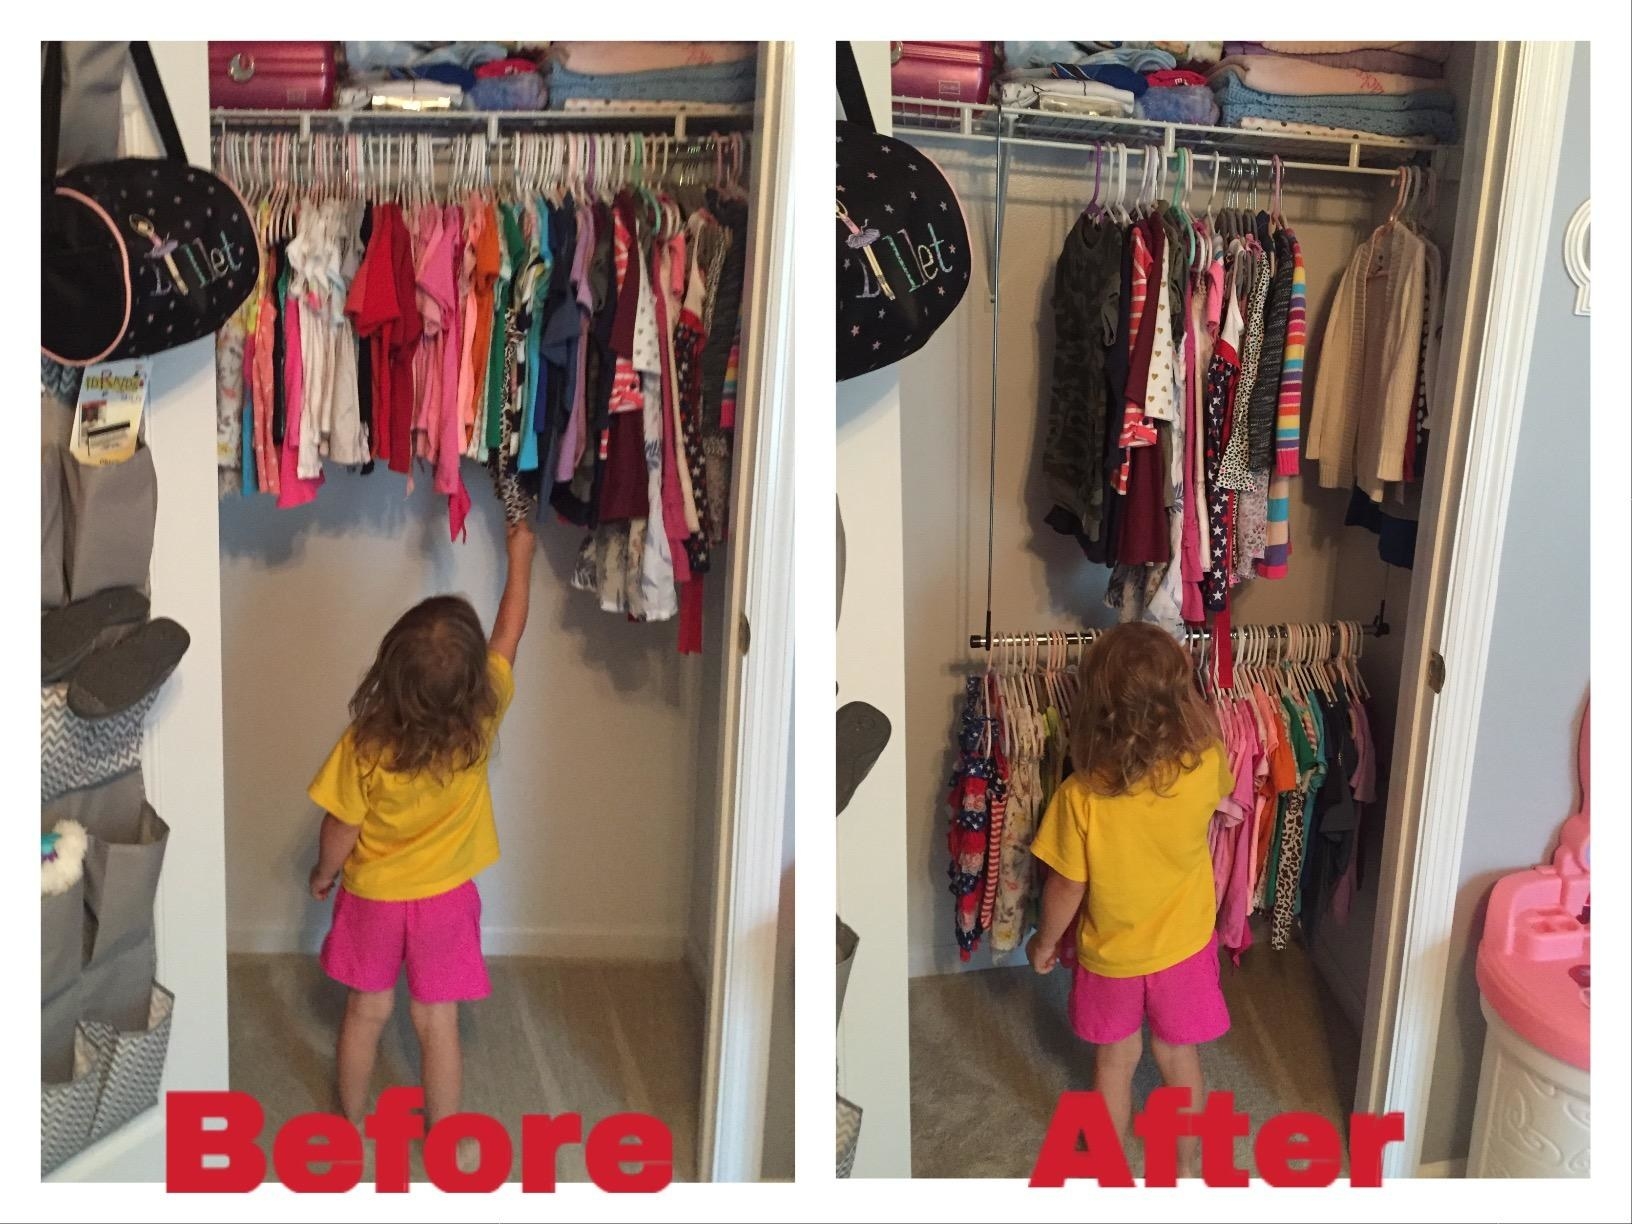 A child is shown reaching for clothing in the closet